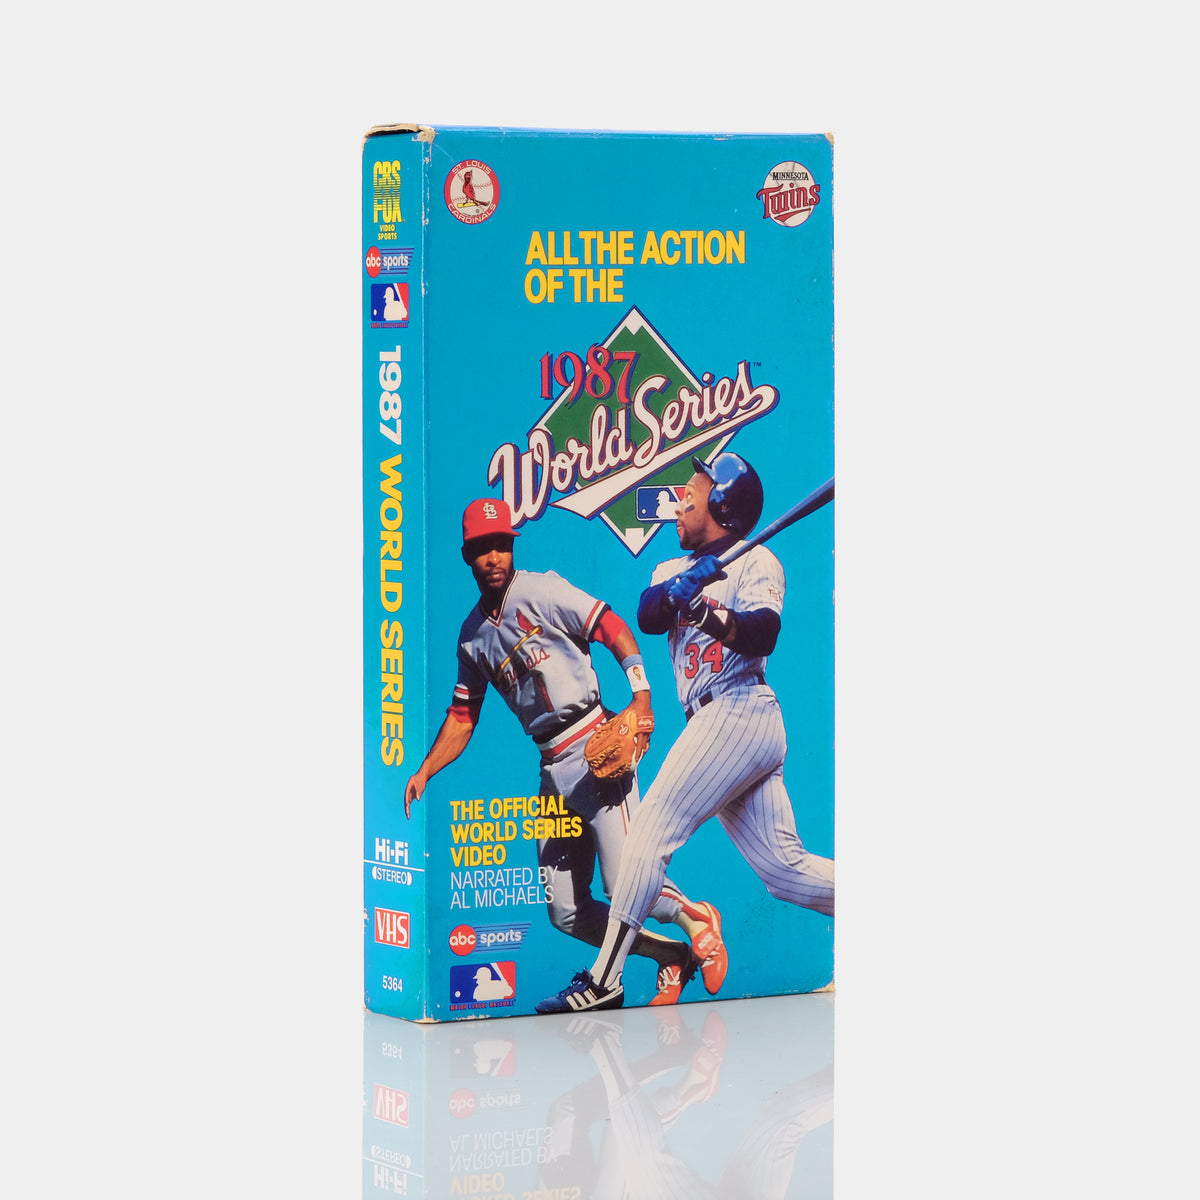 The 1987 World Series VHS Tape